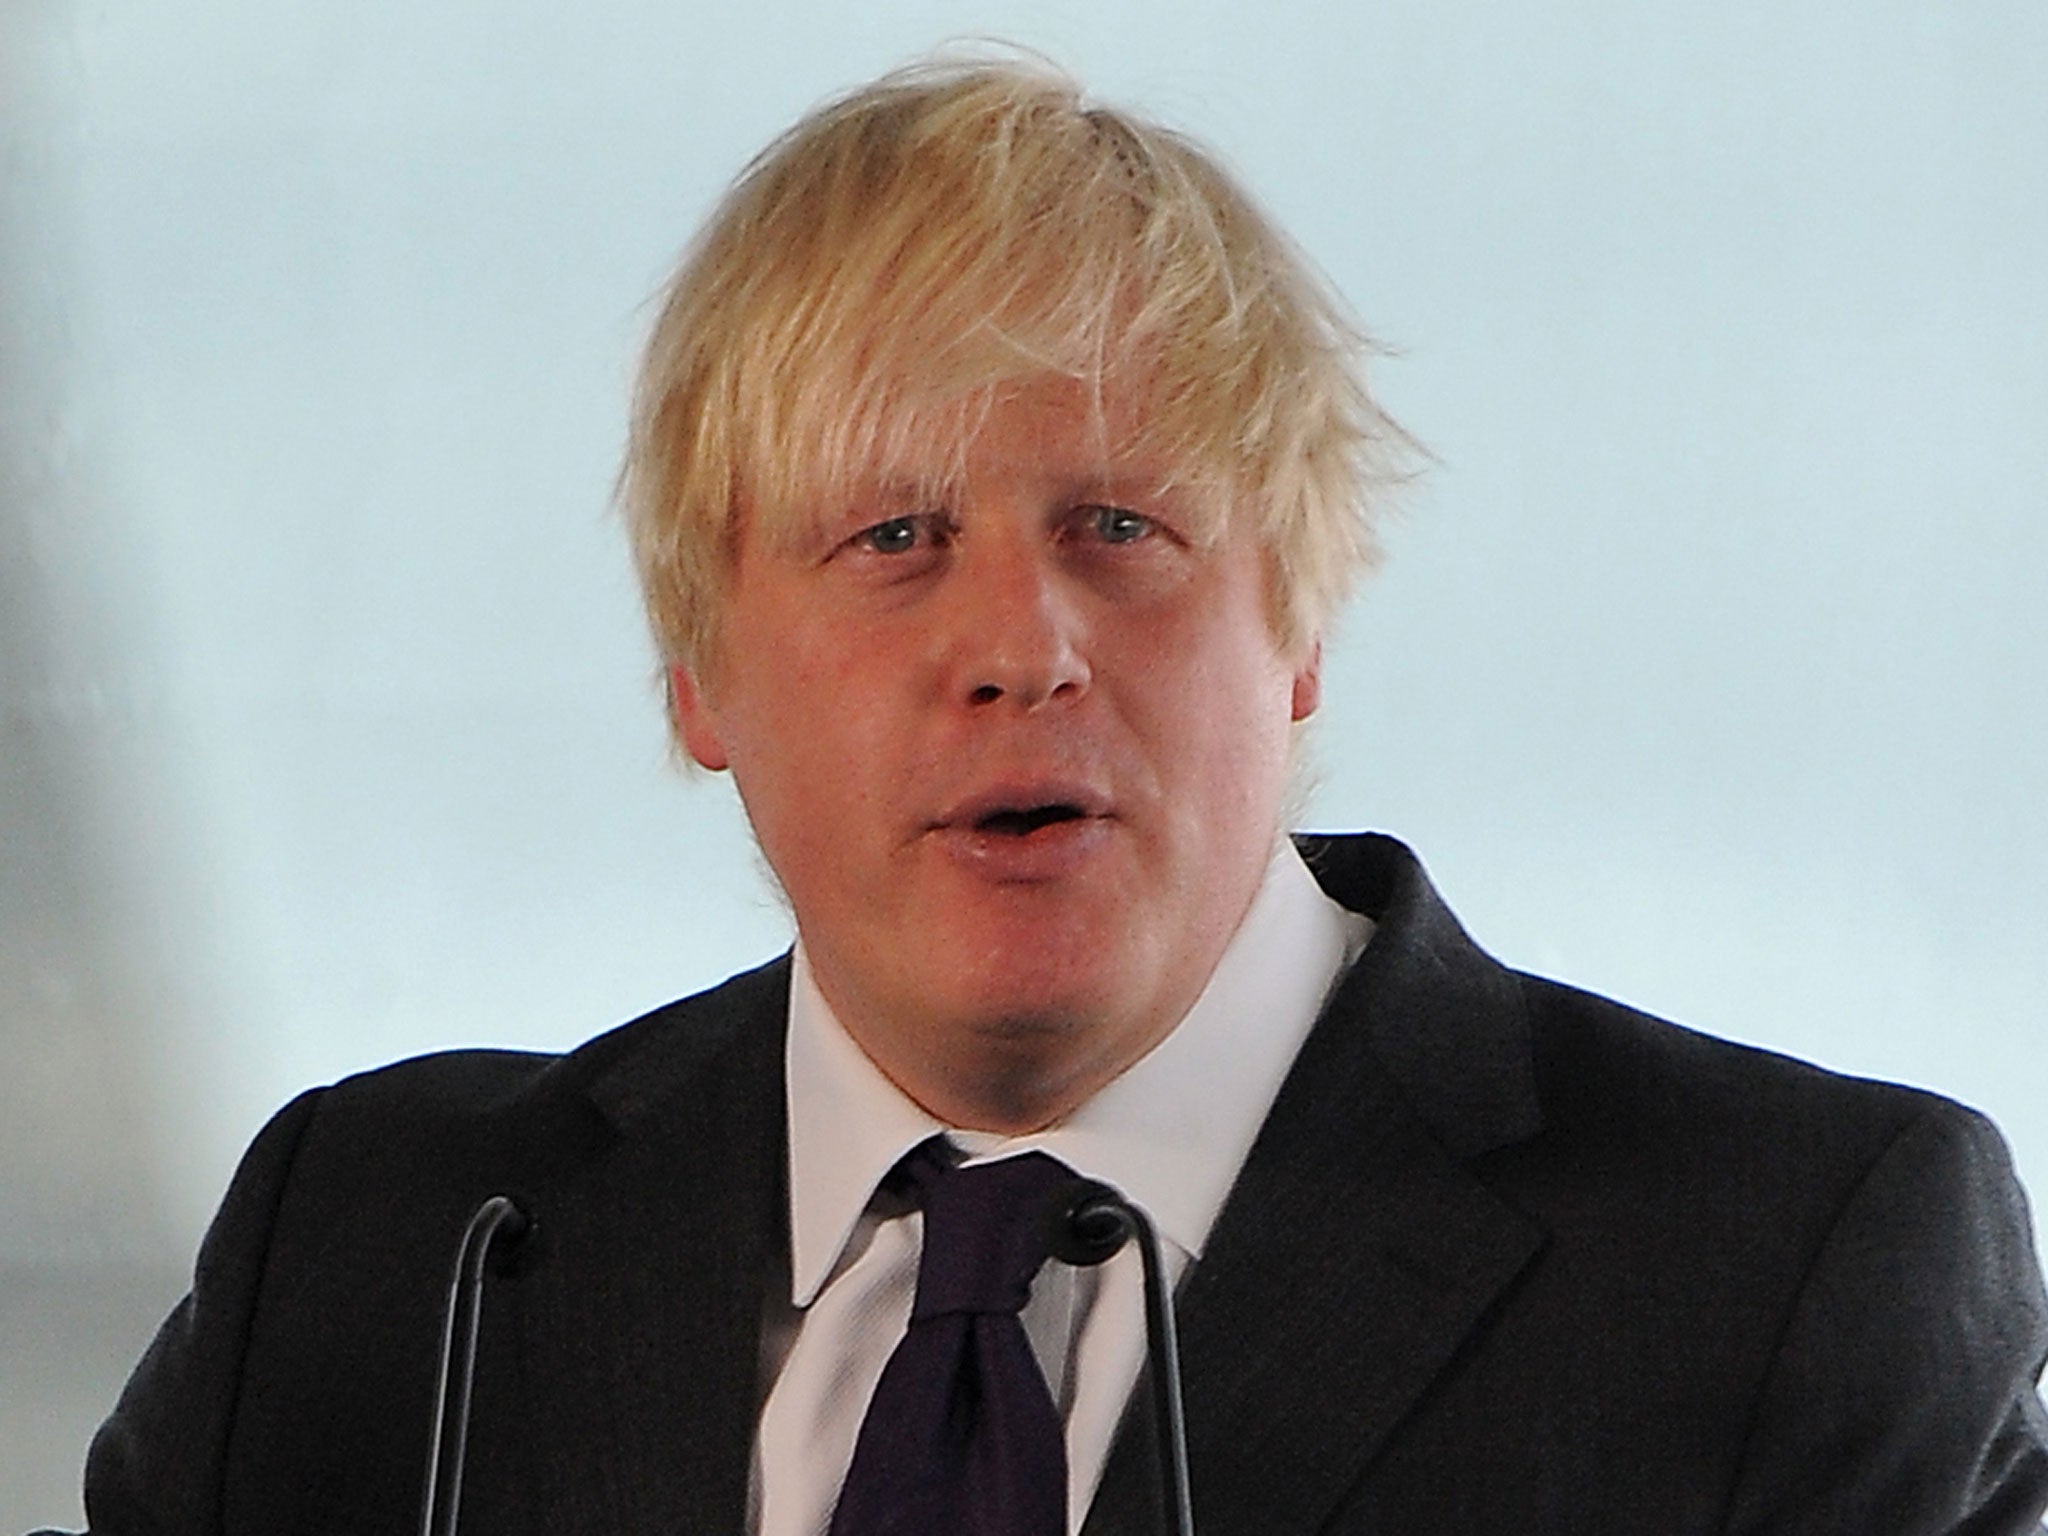 Boris Johnson’s popularity is outstripping that of the Conservative Party and David Cameron